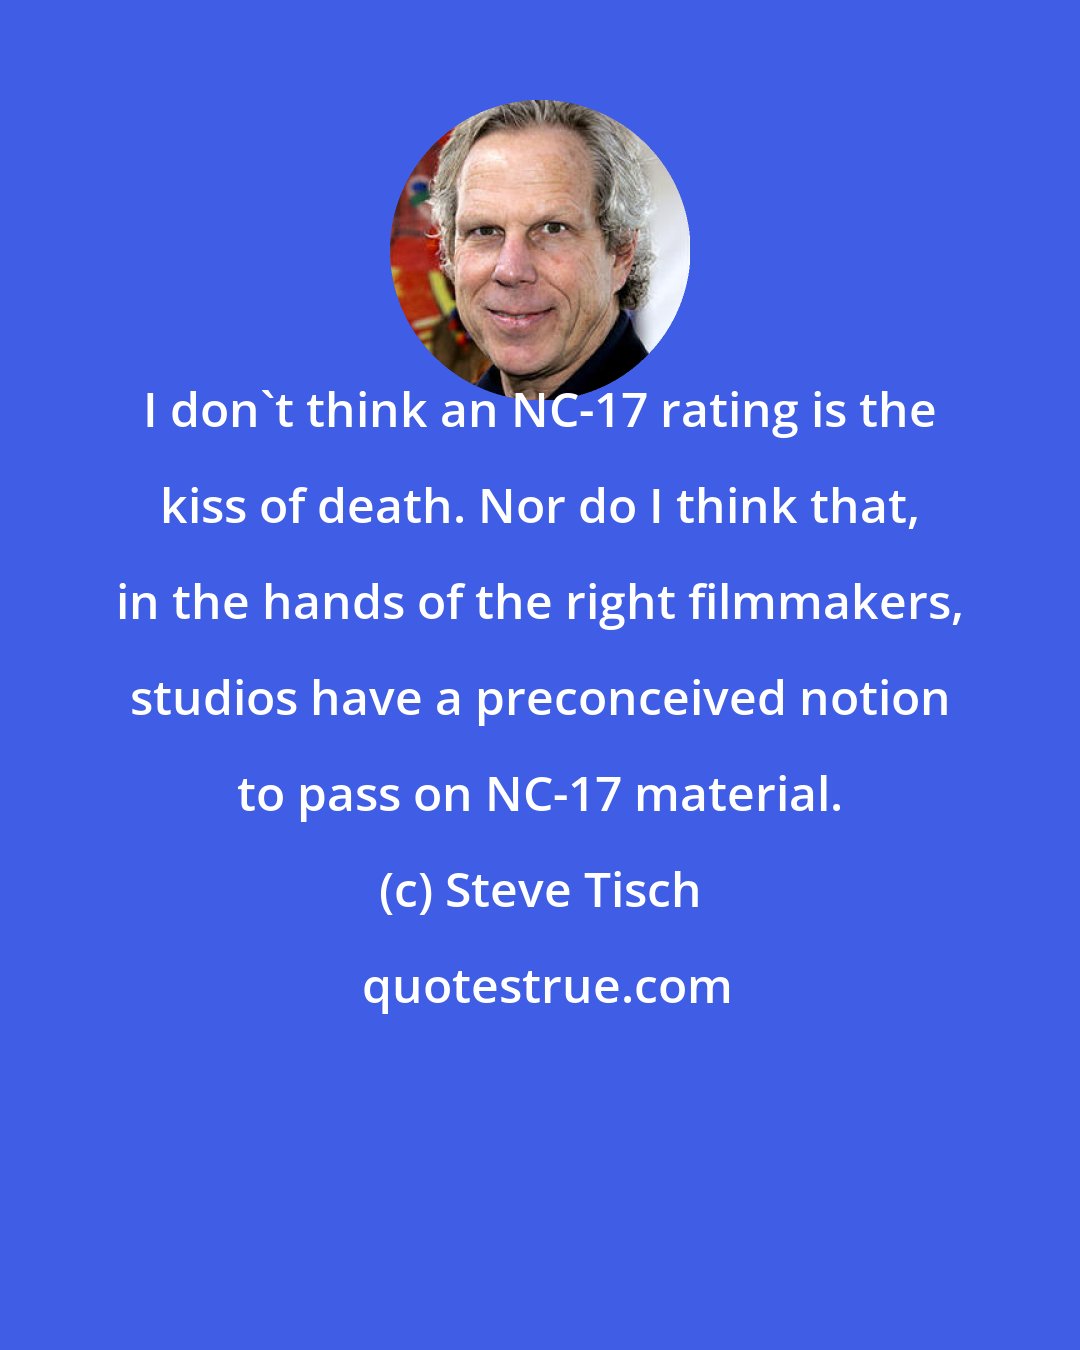 Steve Tisch: I don't think an NC-17 rating is the kiss of death. Nor do I think that, in the hands of the right filmmakers, studios have a preconceived notion to pass on NC-17 material.